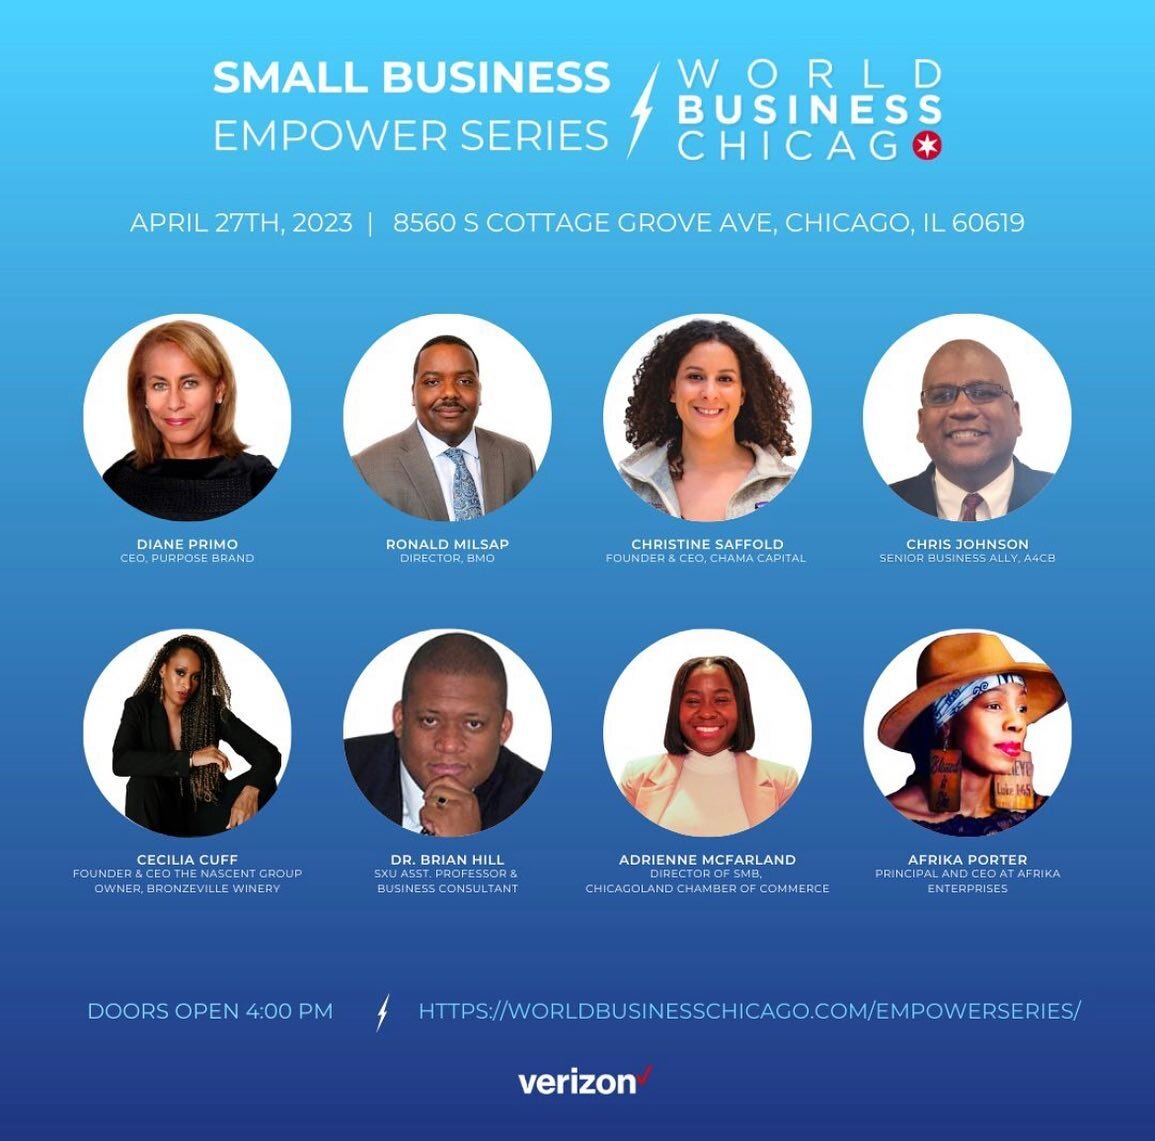 &ldquo;I&rsquo;m honored to be a featured speaker at the @worldbusinesschicago Small Business Empower Series event this Thursday! It&rsquo;s gonna be 🔥

Looking forward to a fruitful conversation about capital with my fellow panelists, and to hearin